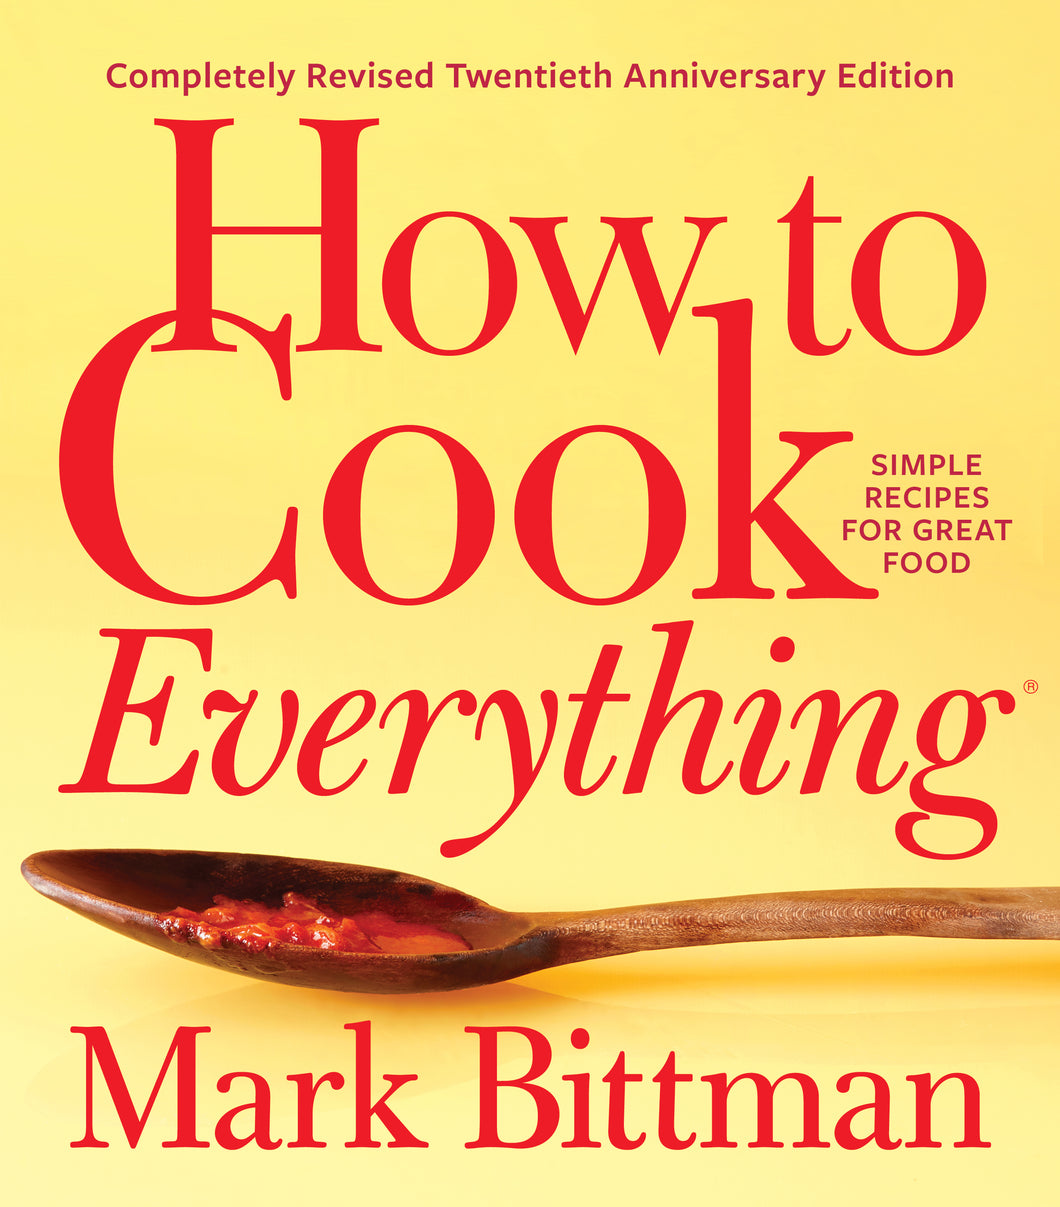 Mark Bittman's How to Cook Everything